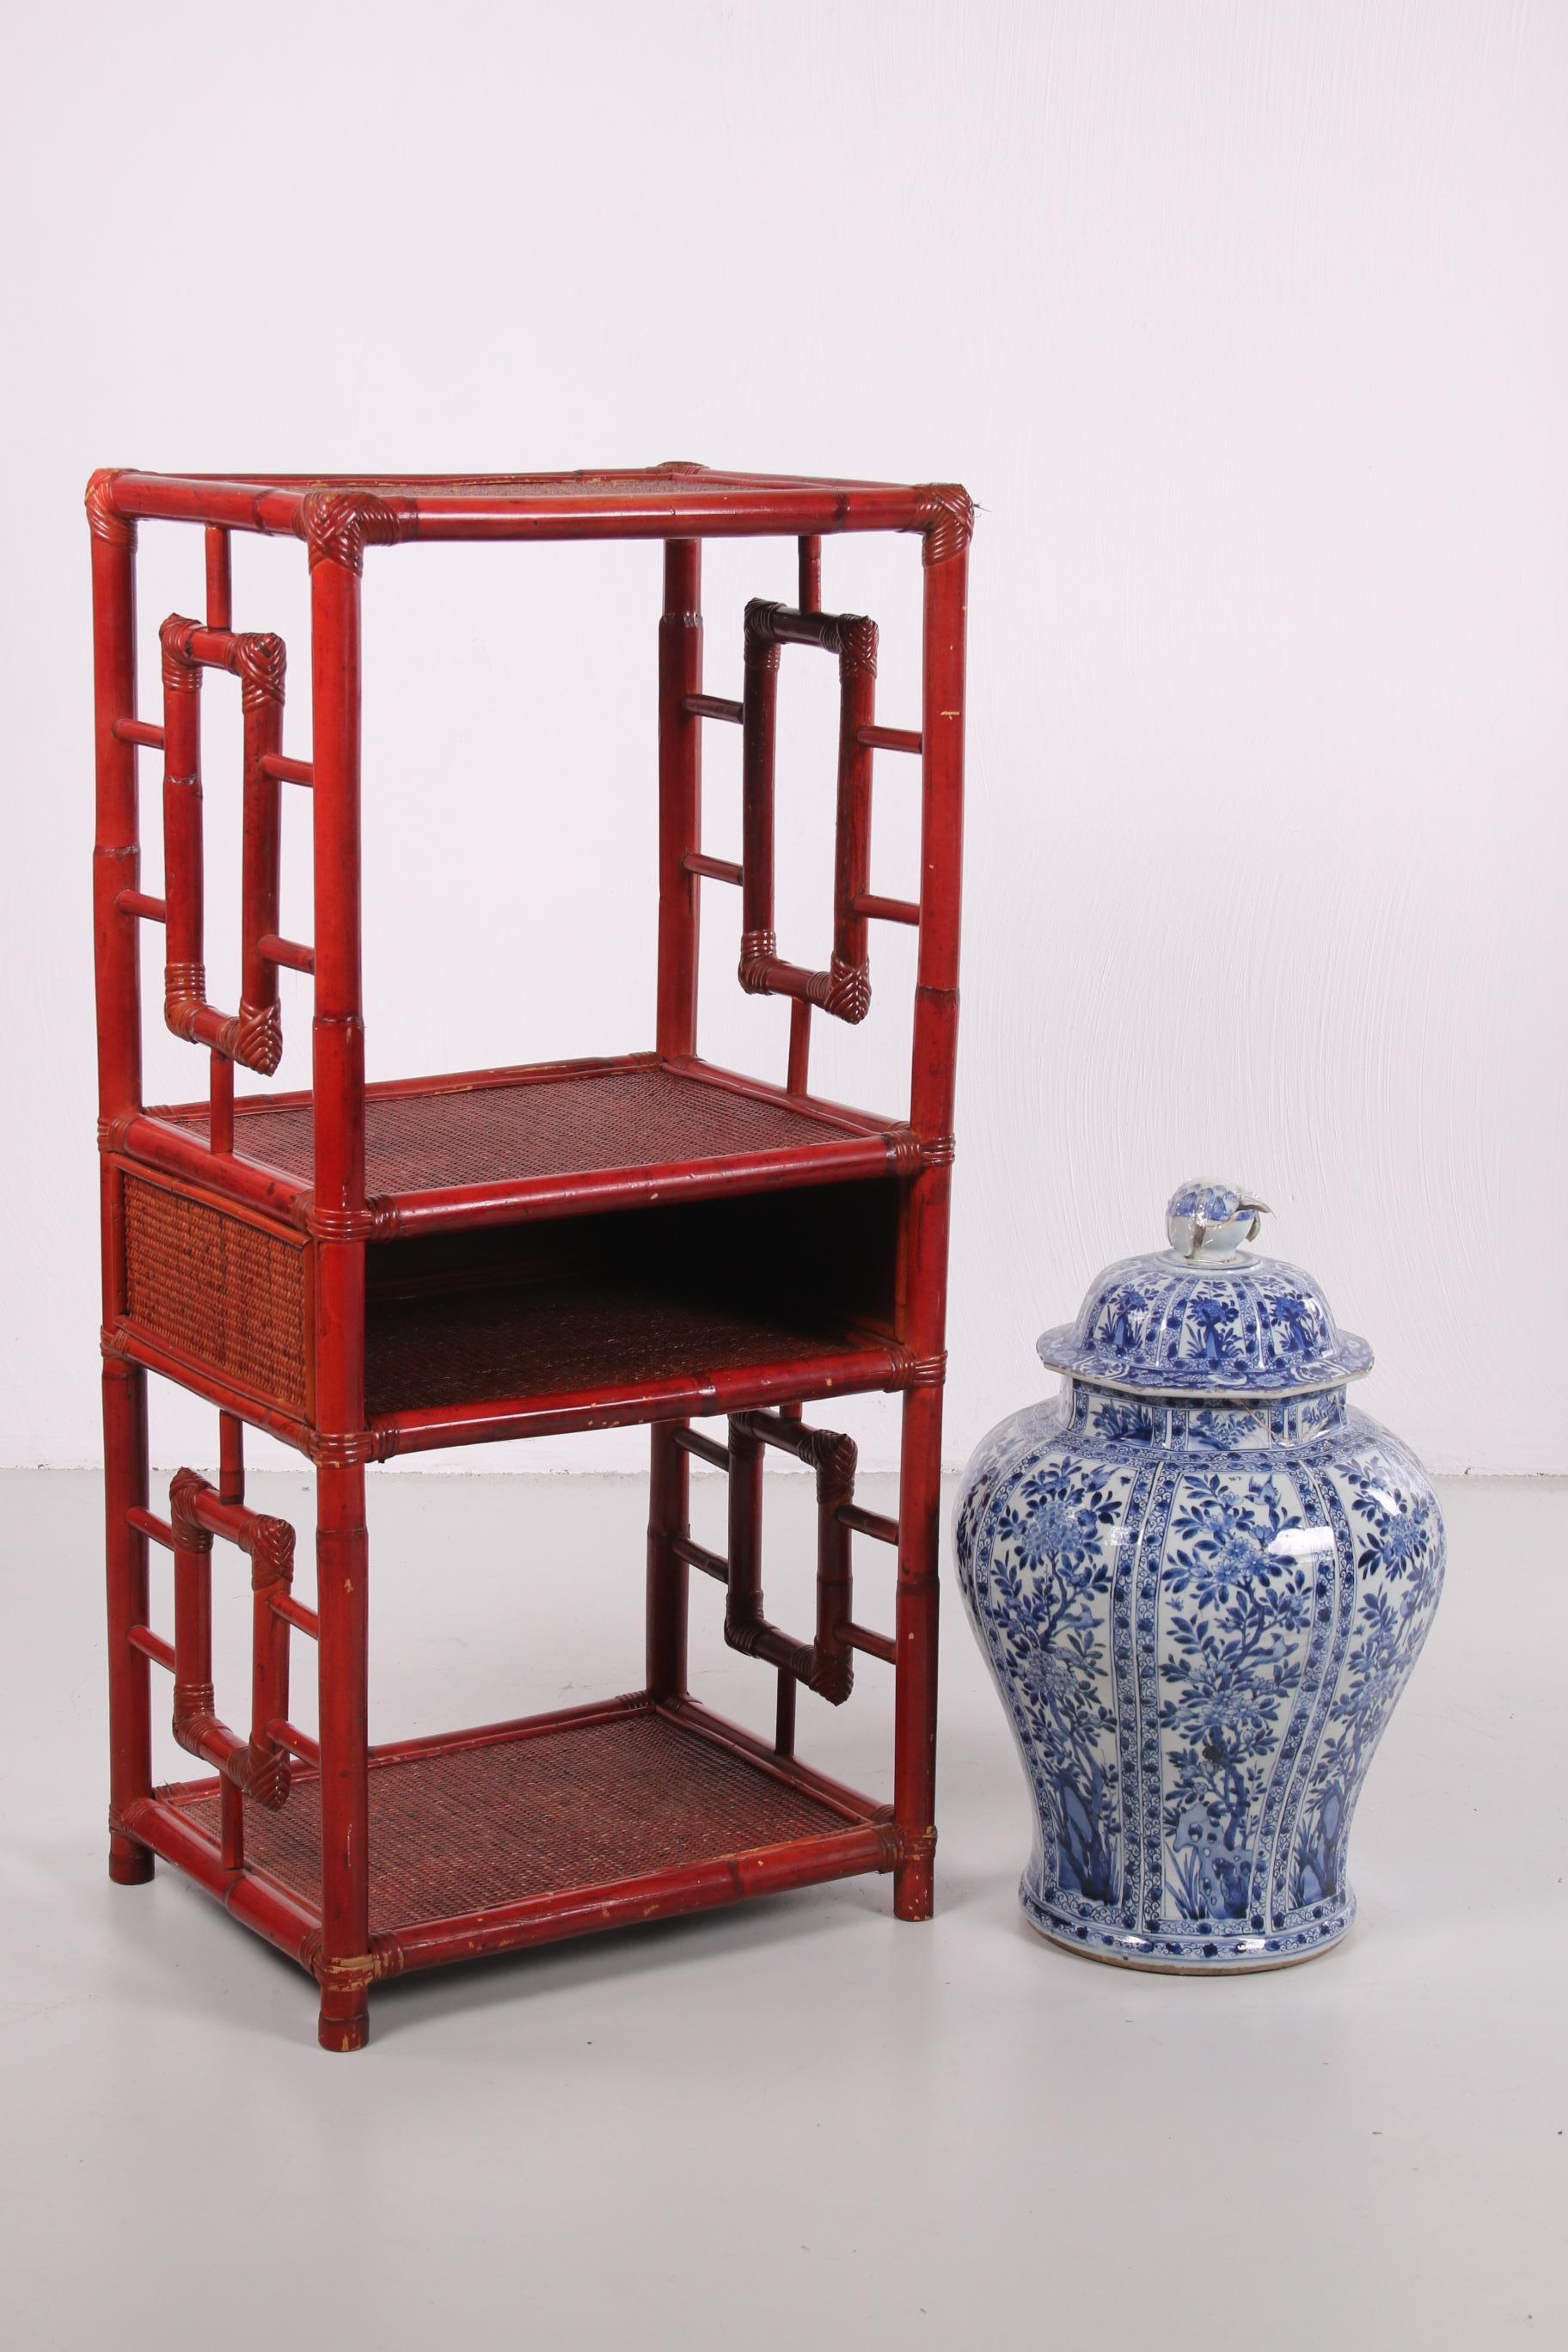 Chinese Export Chinese 19th Century Etagere or Room Divider Made of Bamboo, Old Red